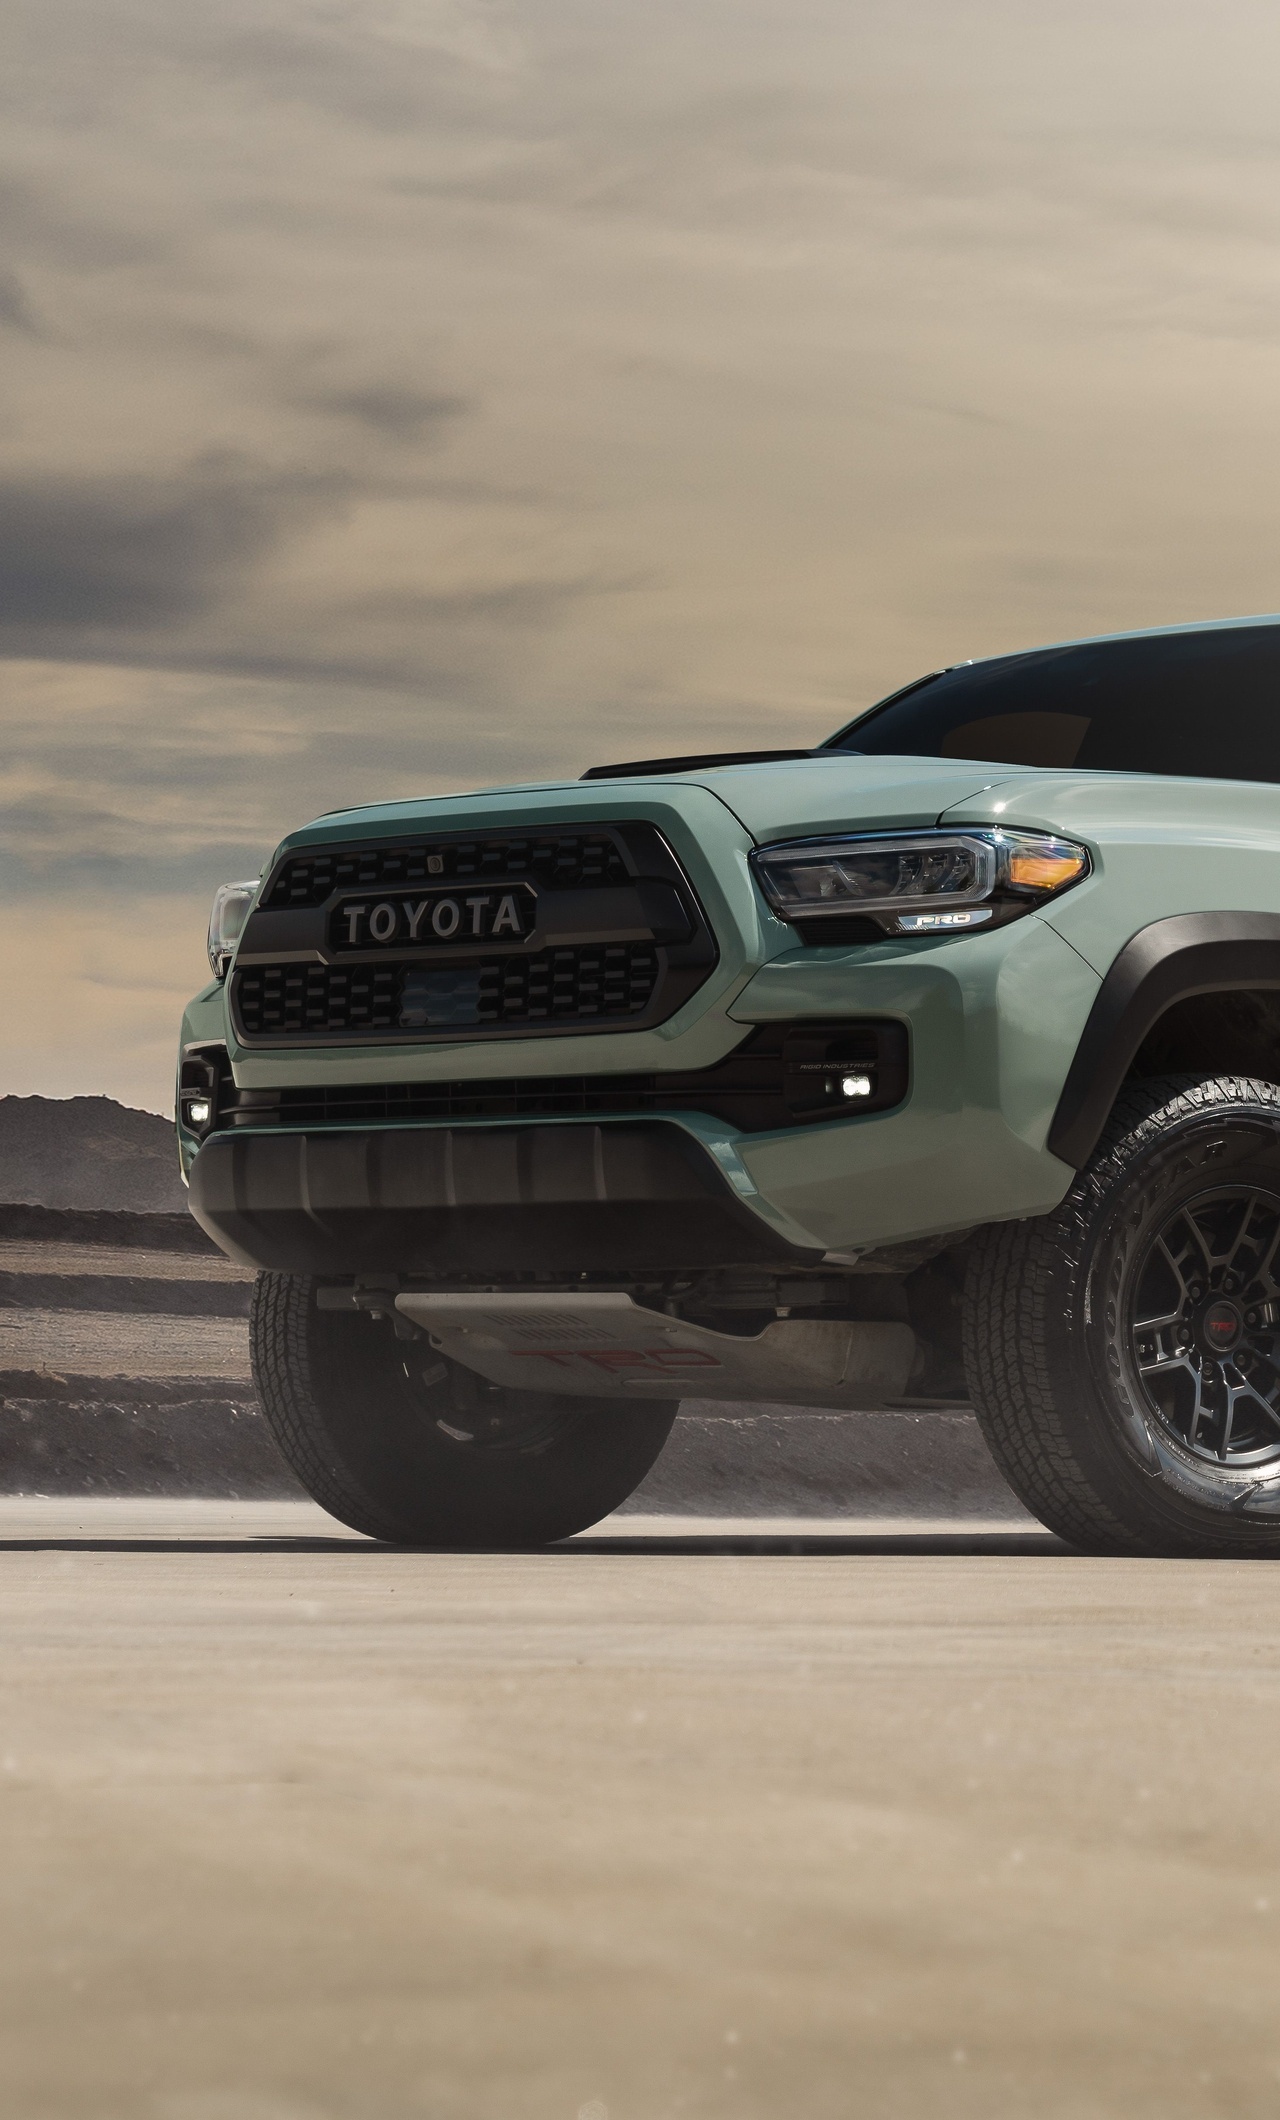 Toyota Tundra, Tacoma iPhone 6, HD wallpapers, Auto industry, 1280x2120 HD Phone